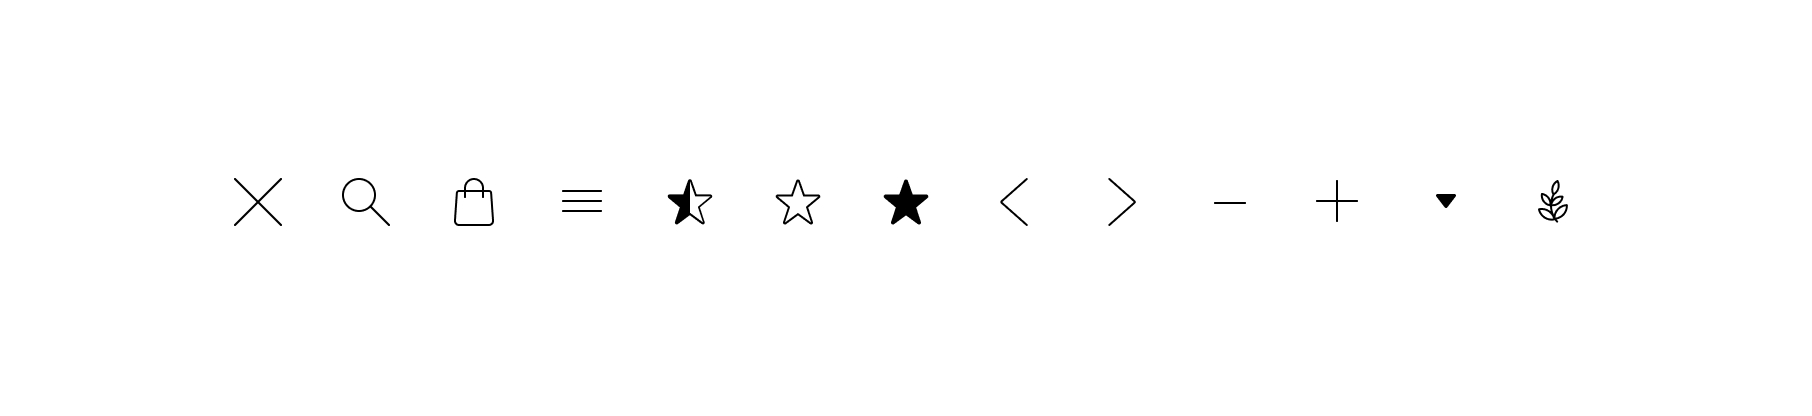 A row of different icons needed for the site, including stars, close, arrows, shopping bag, search, and more.